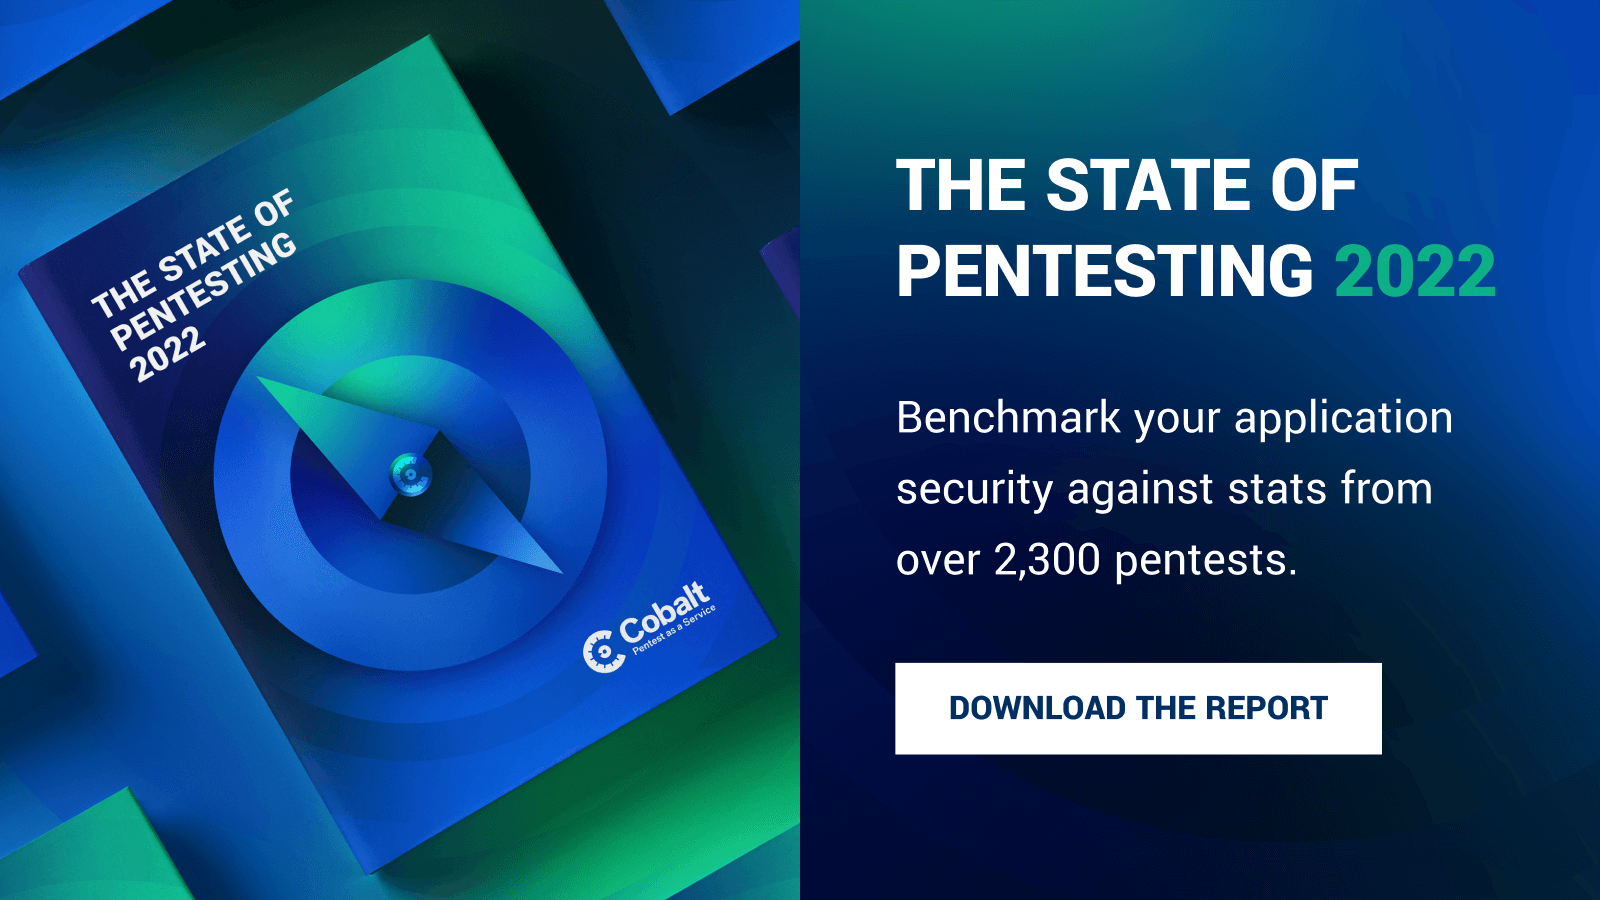 Download the State of Pentesting 2022